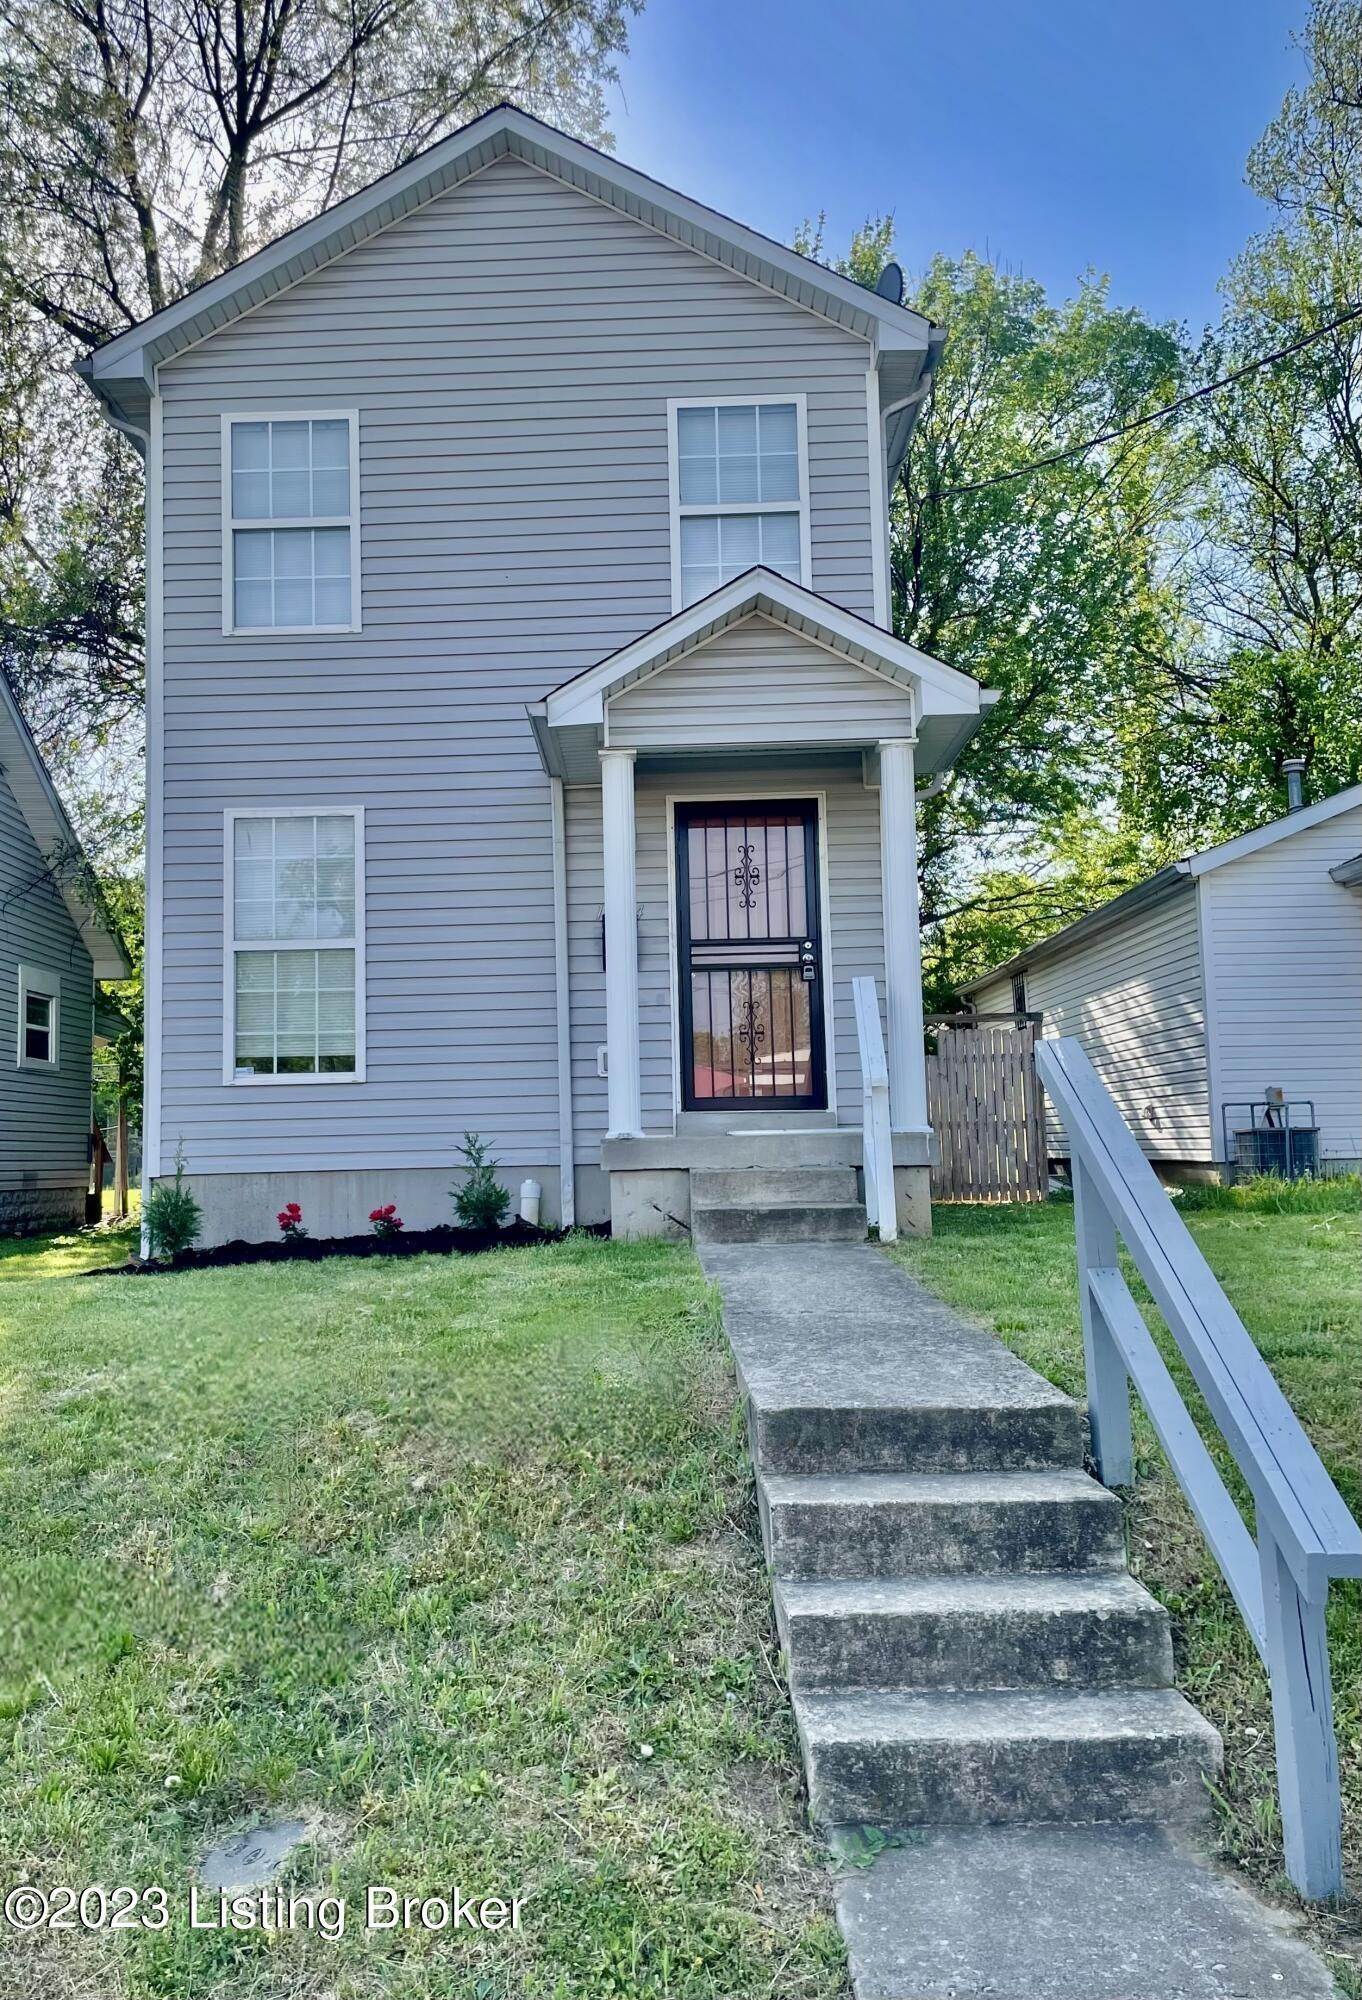 19. Single Family at Louisville, KY 40211